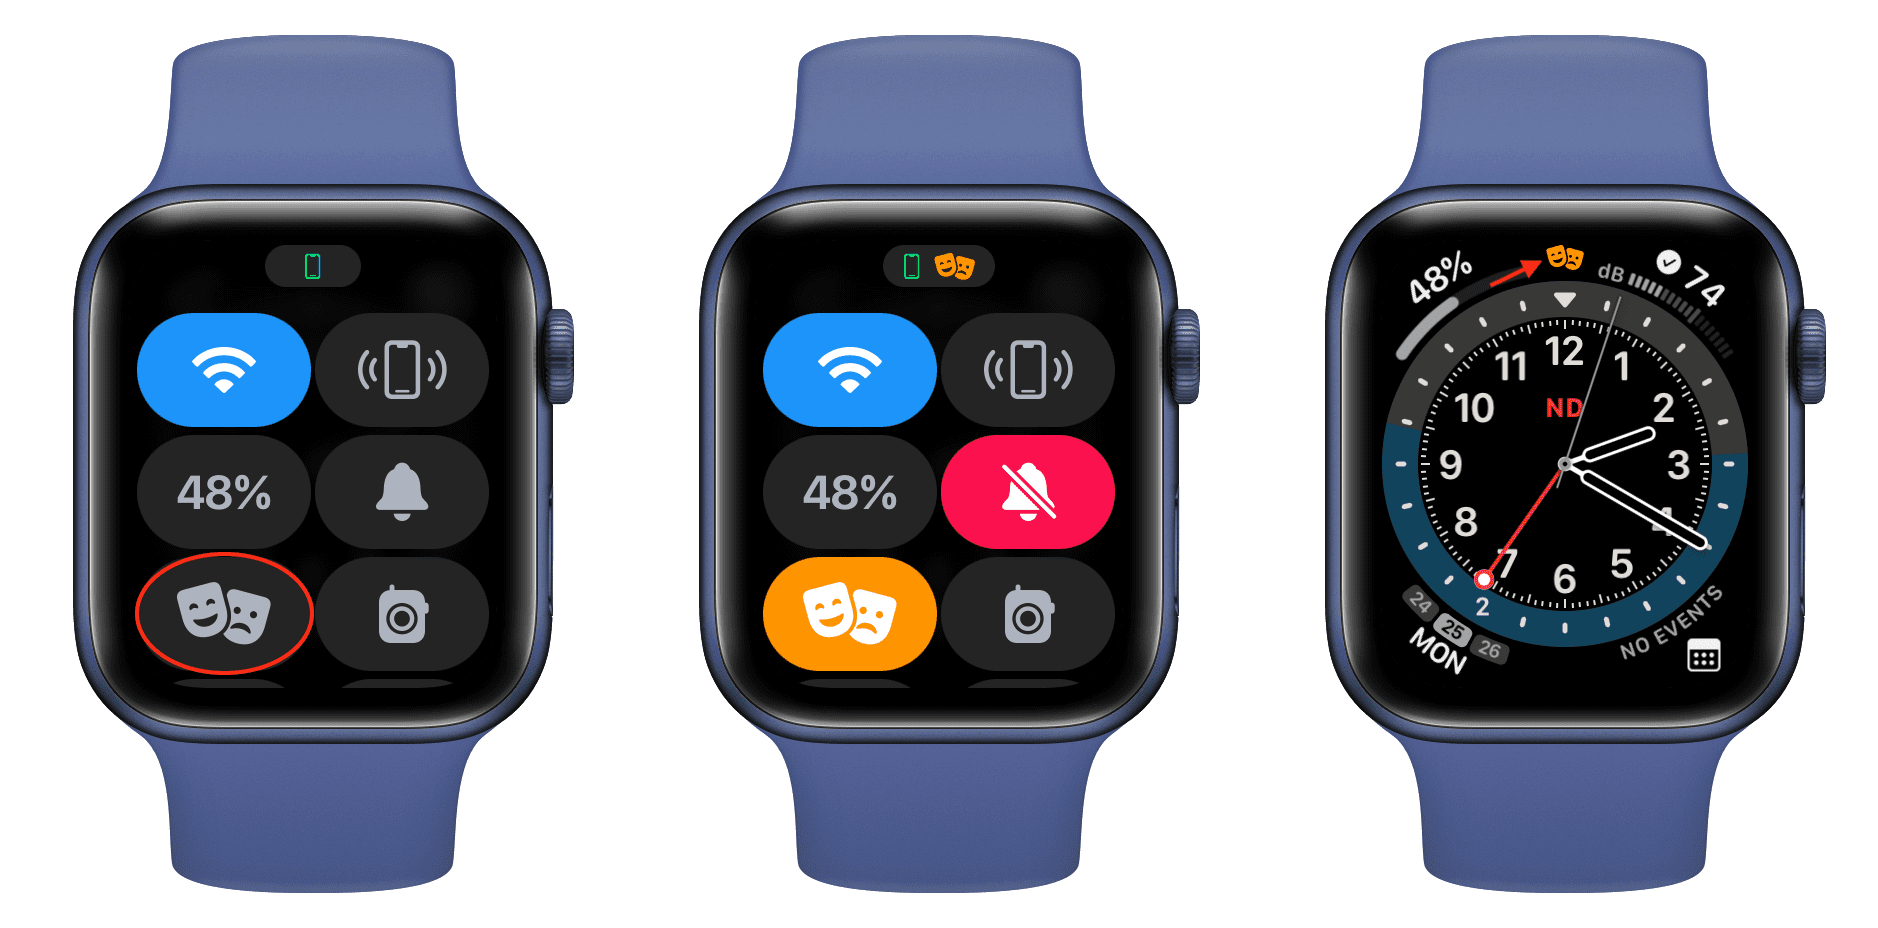 Theater Mode enabled on Apple Watch